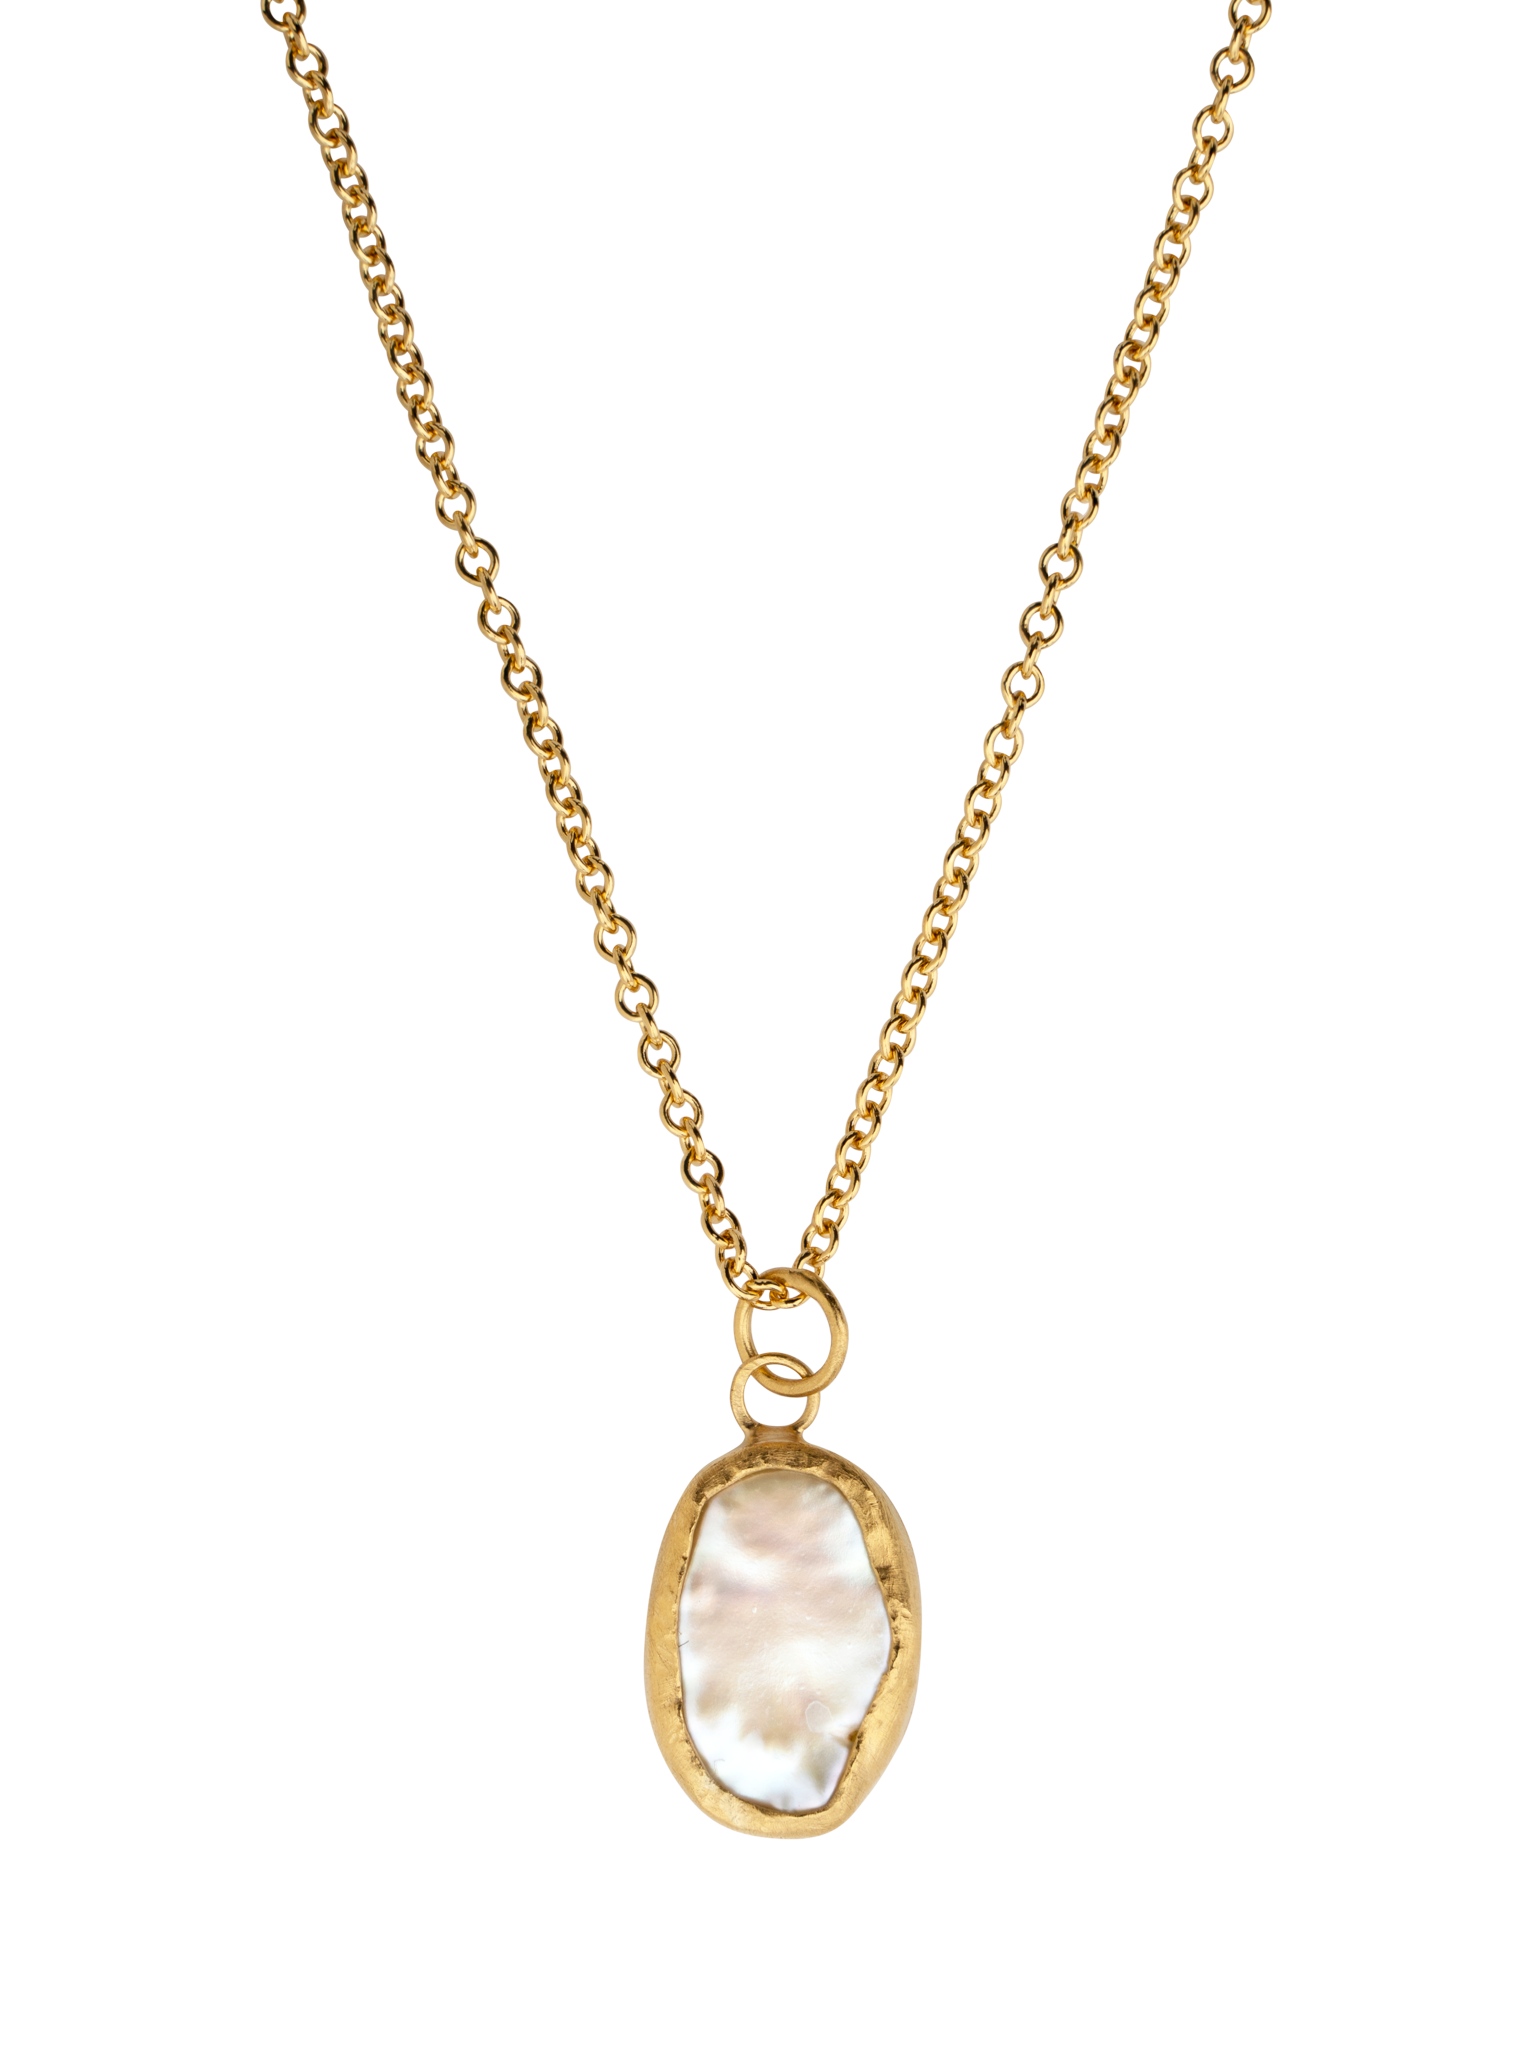 Oval baroque pearl pendant necklace